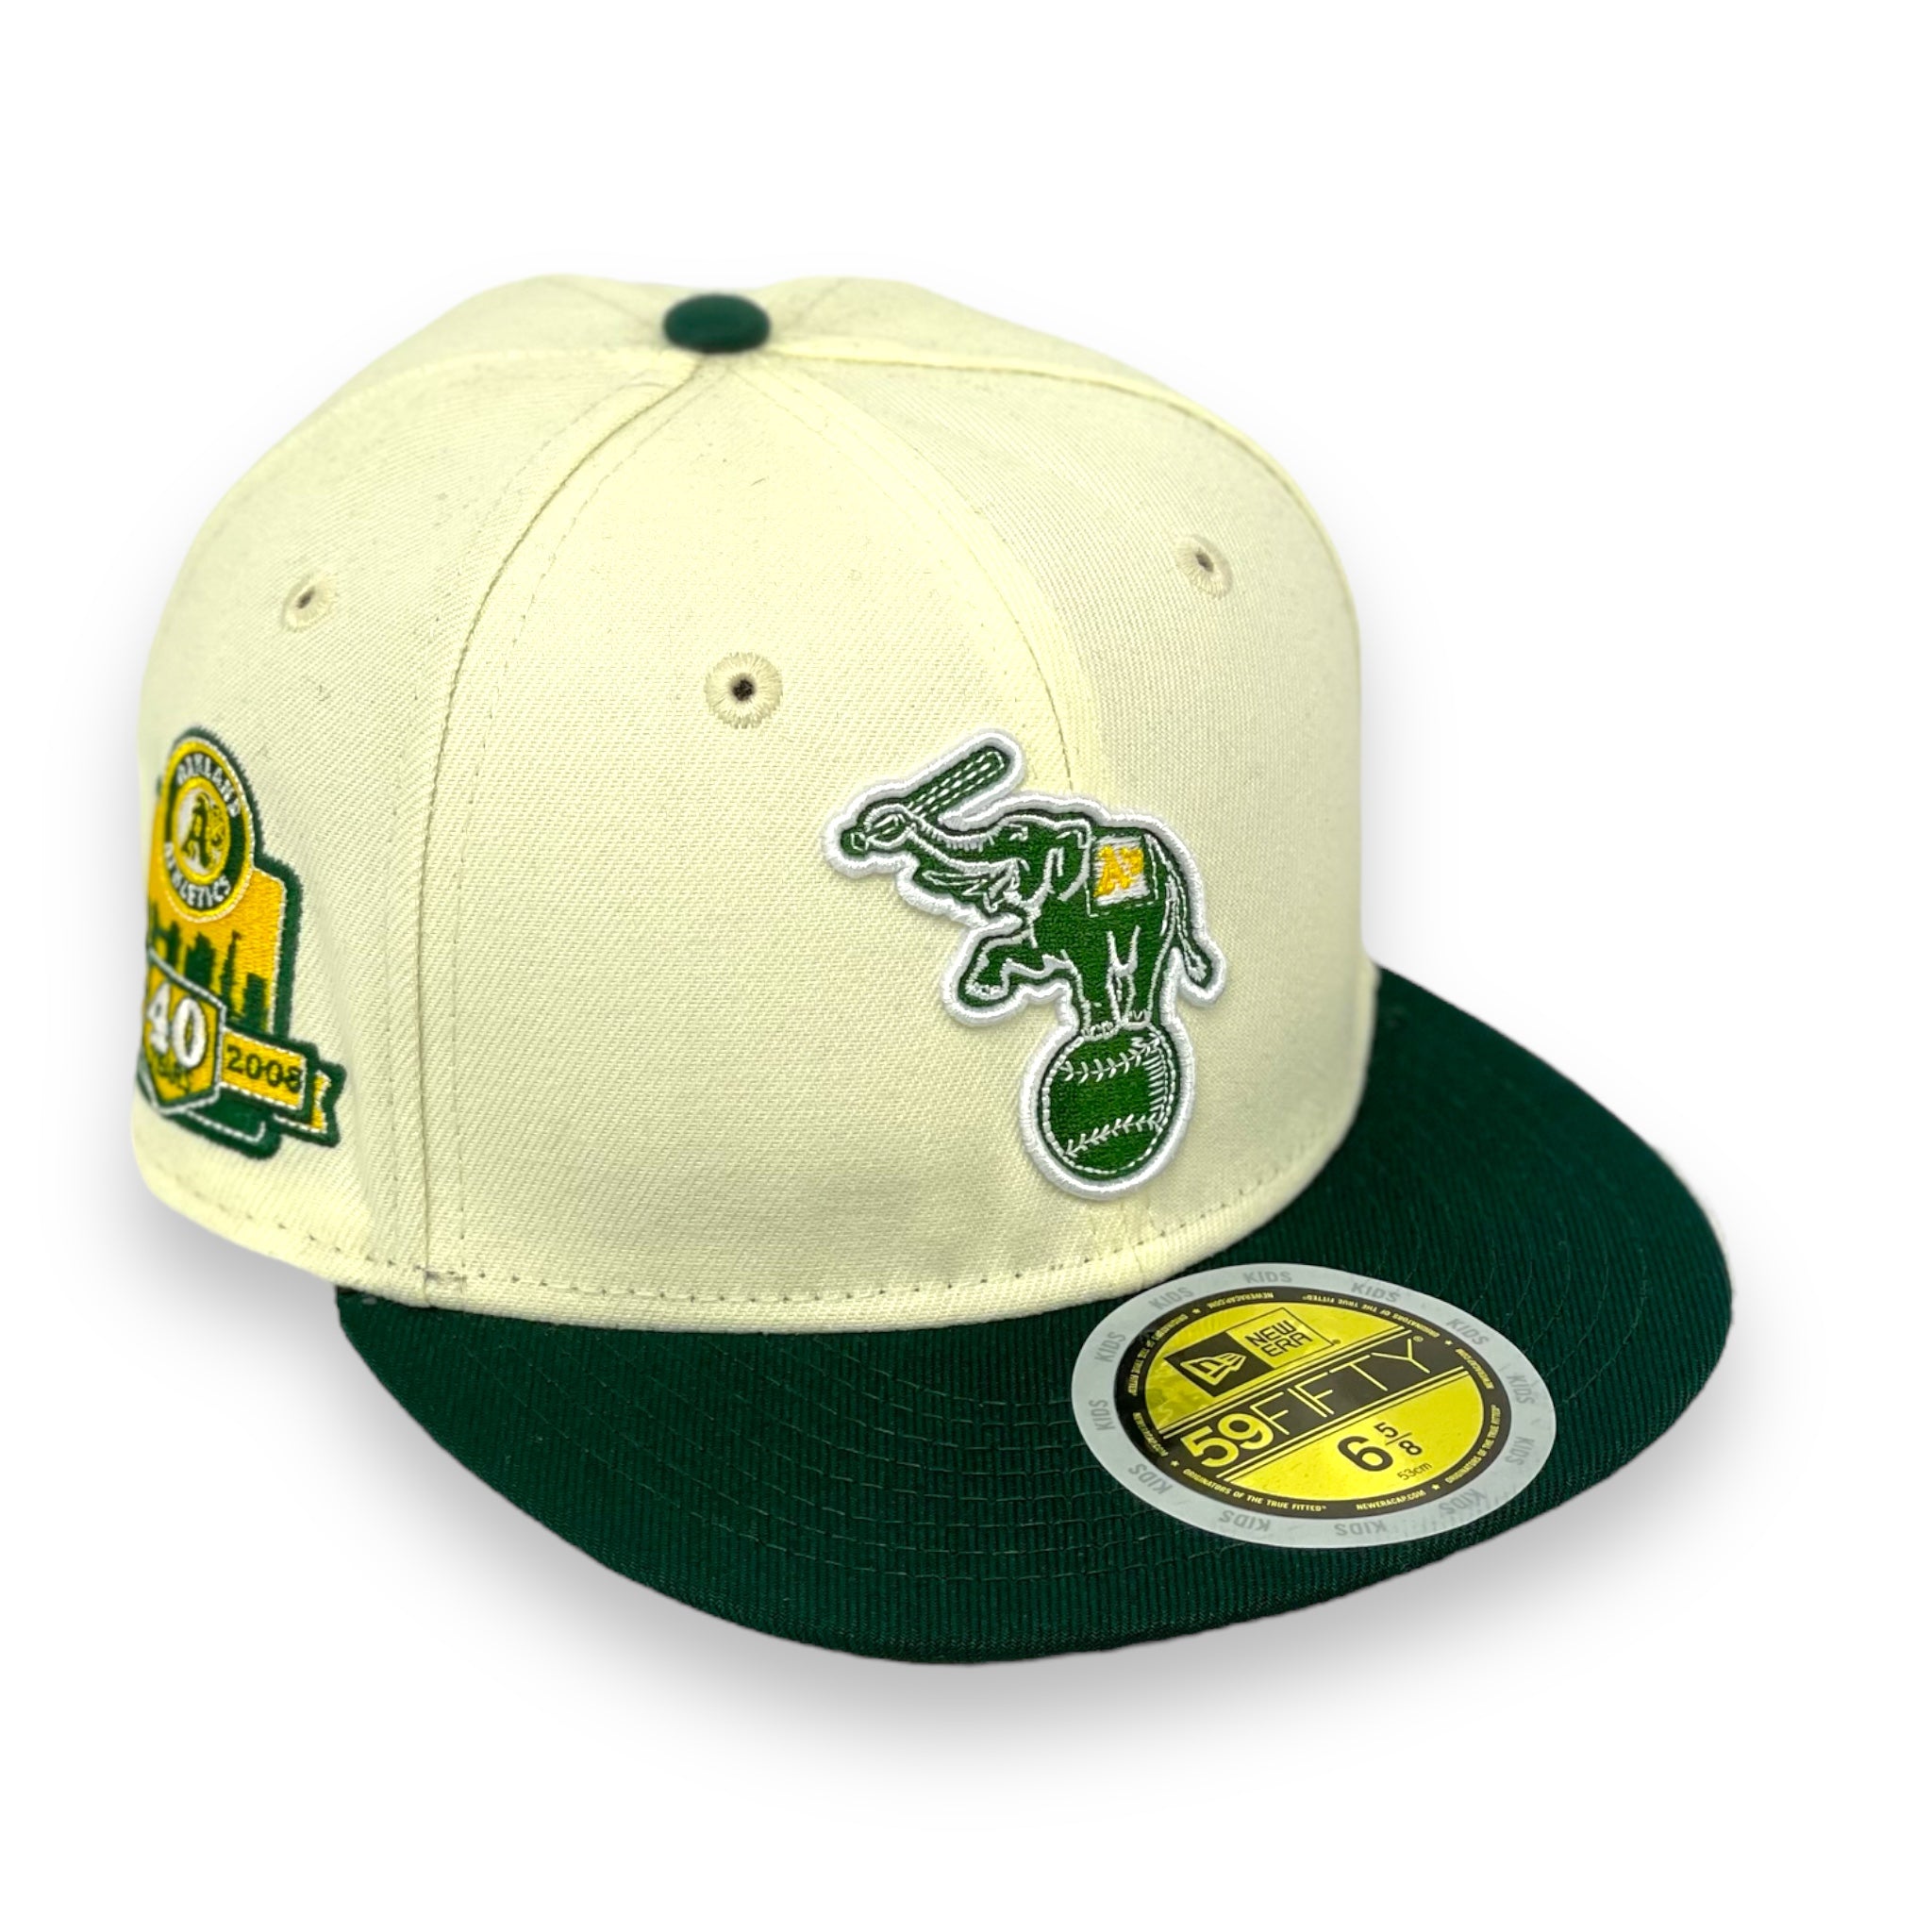 "KIDS"- OAKLAND ATHLETICS (OFF-WHITE)  "40TH ANNIVERSARY" NEW ERA 59FIFTY FITTED  (A-GOLD UNDER VISOR)